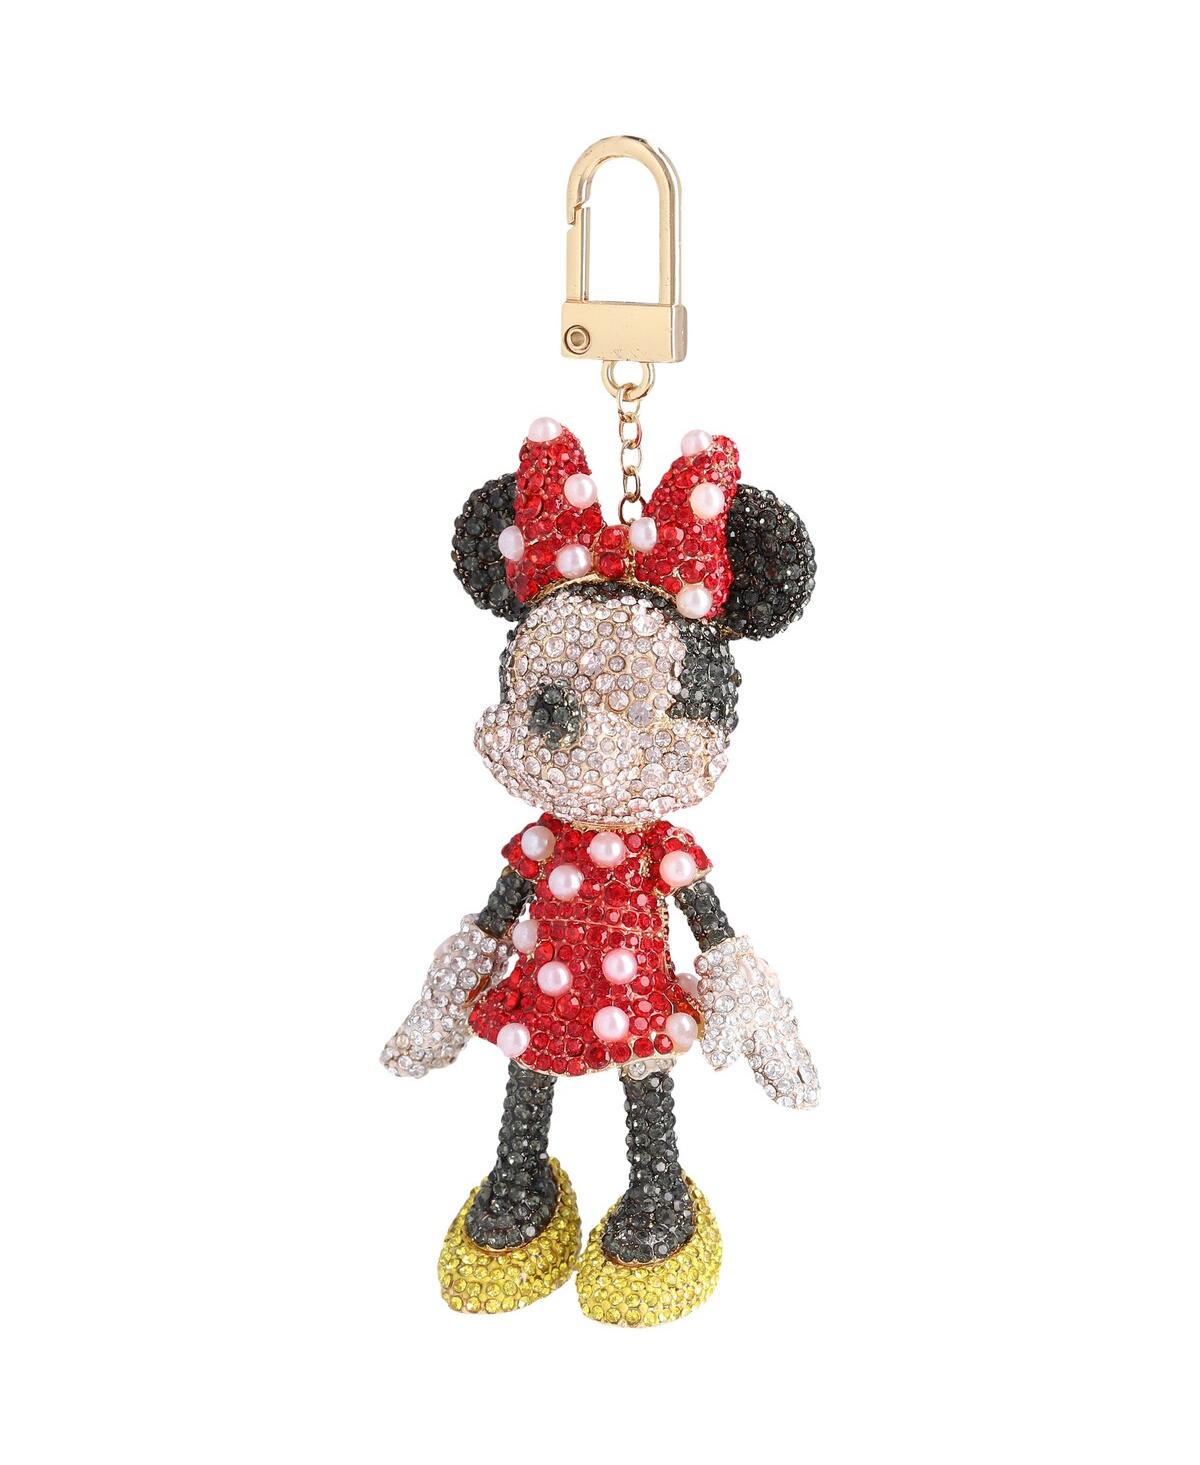 Women's Baublebar Minnie Mouse Bag Charm - Red